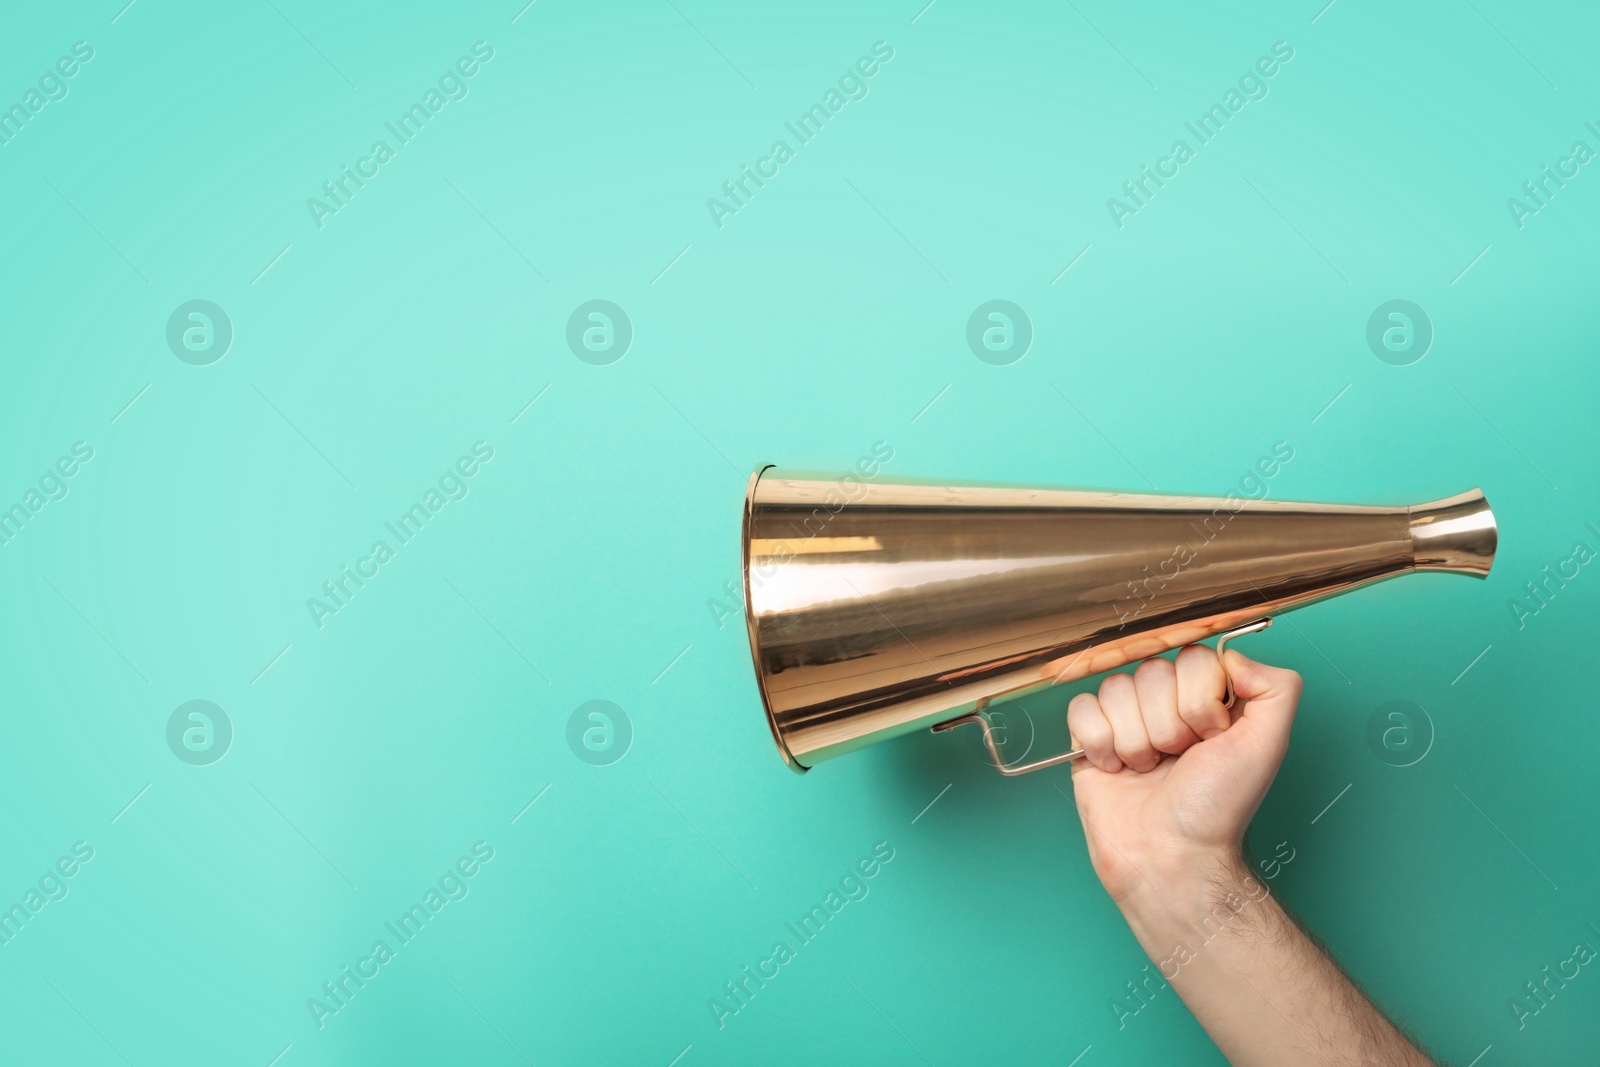 Photo of Man holding megaphone on color background